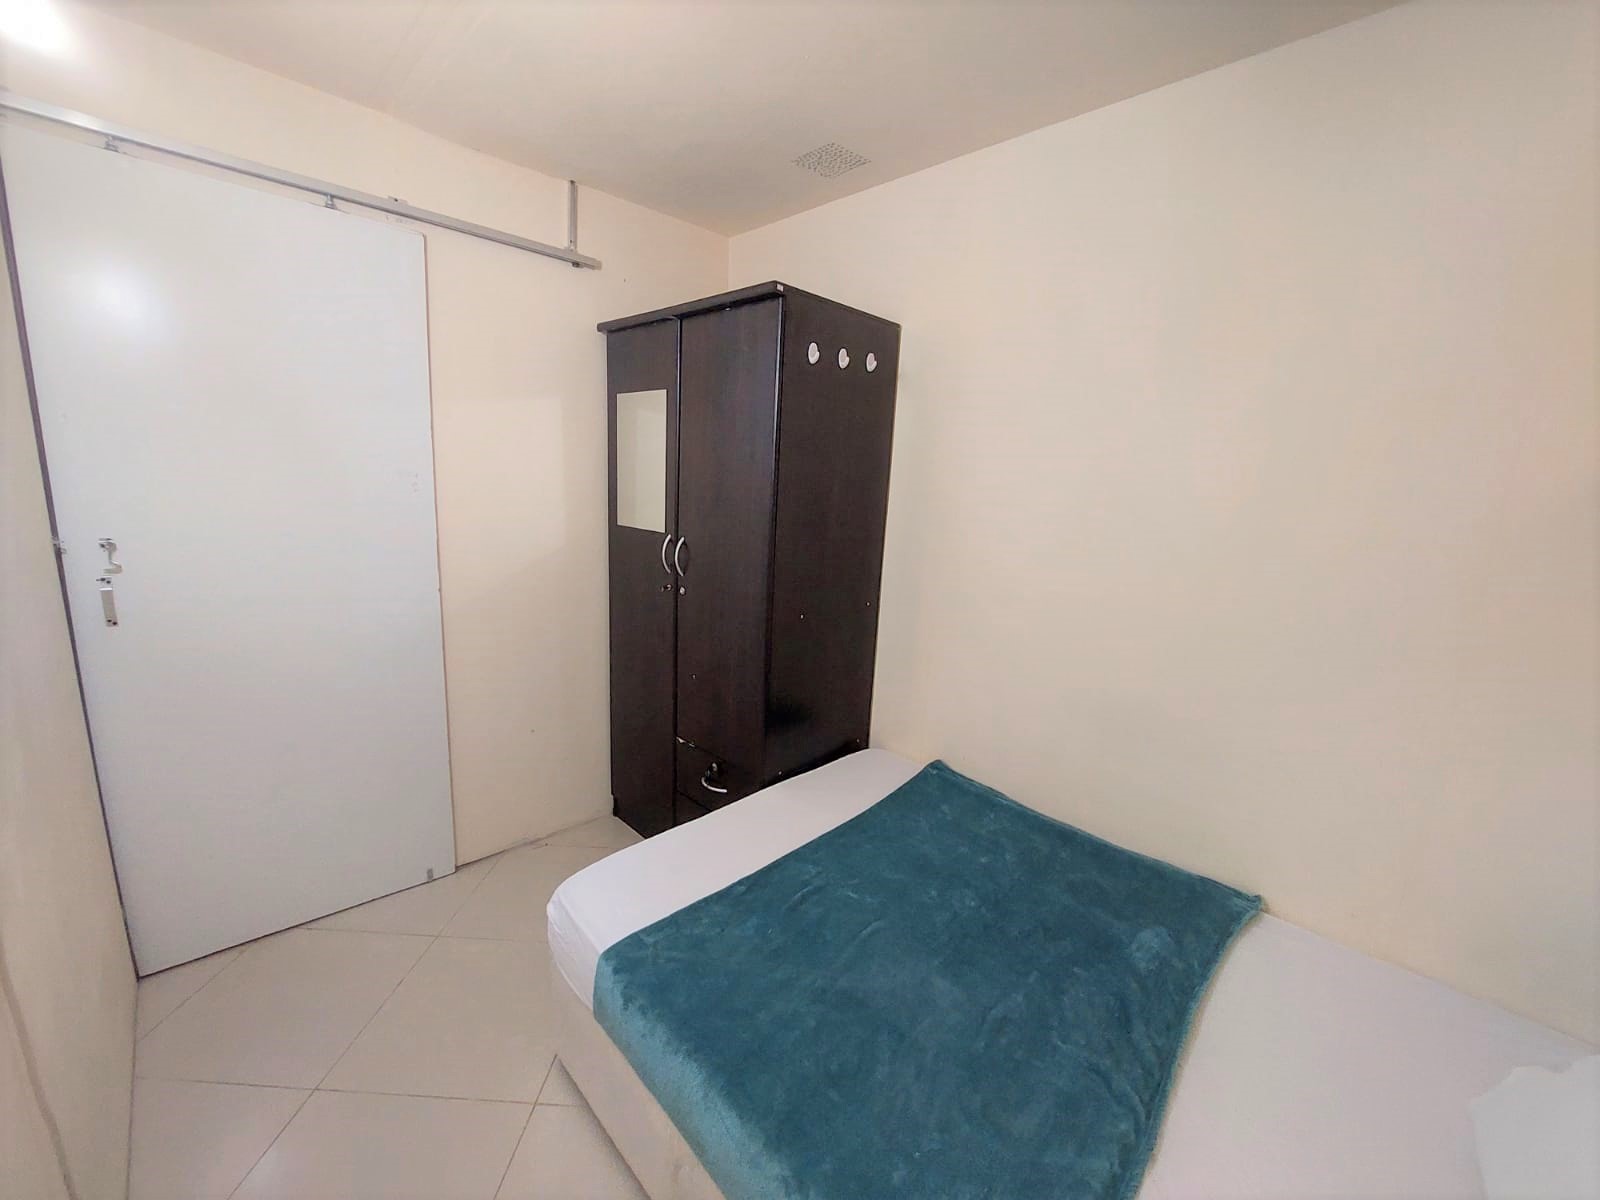 Closed Partition Room With Sharing Bathroom